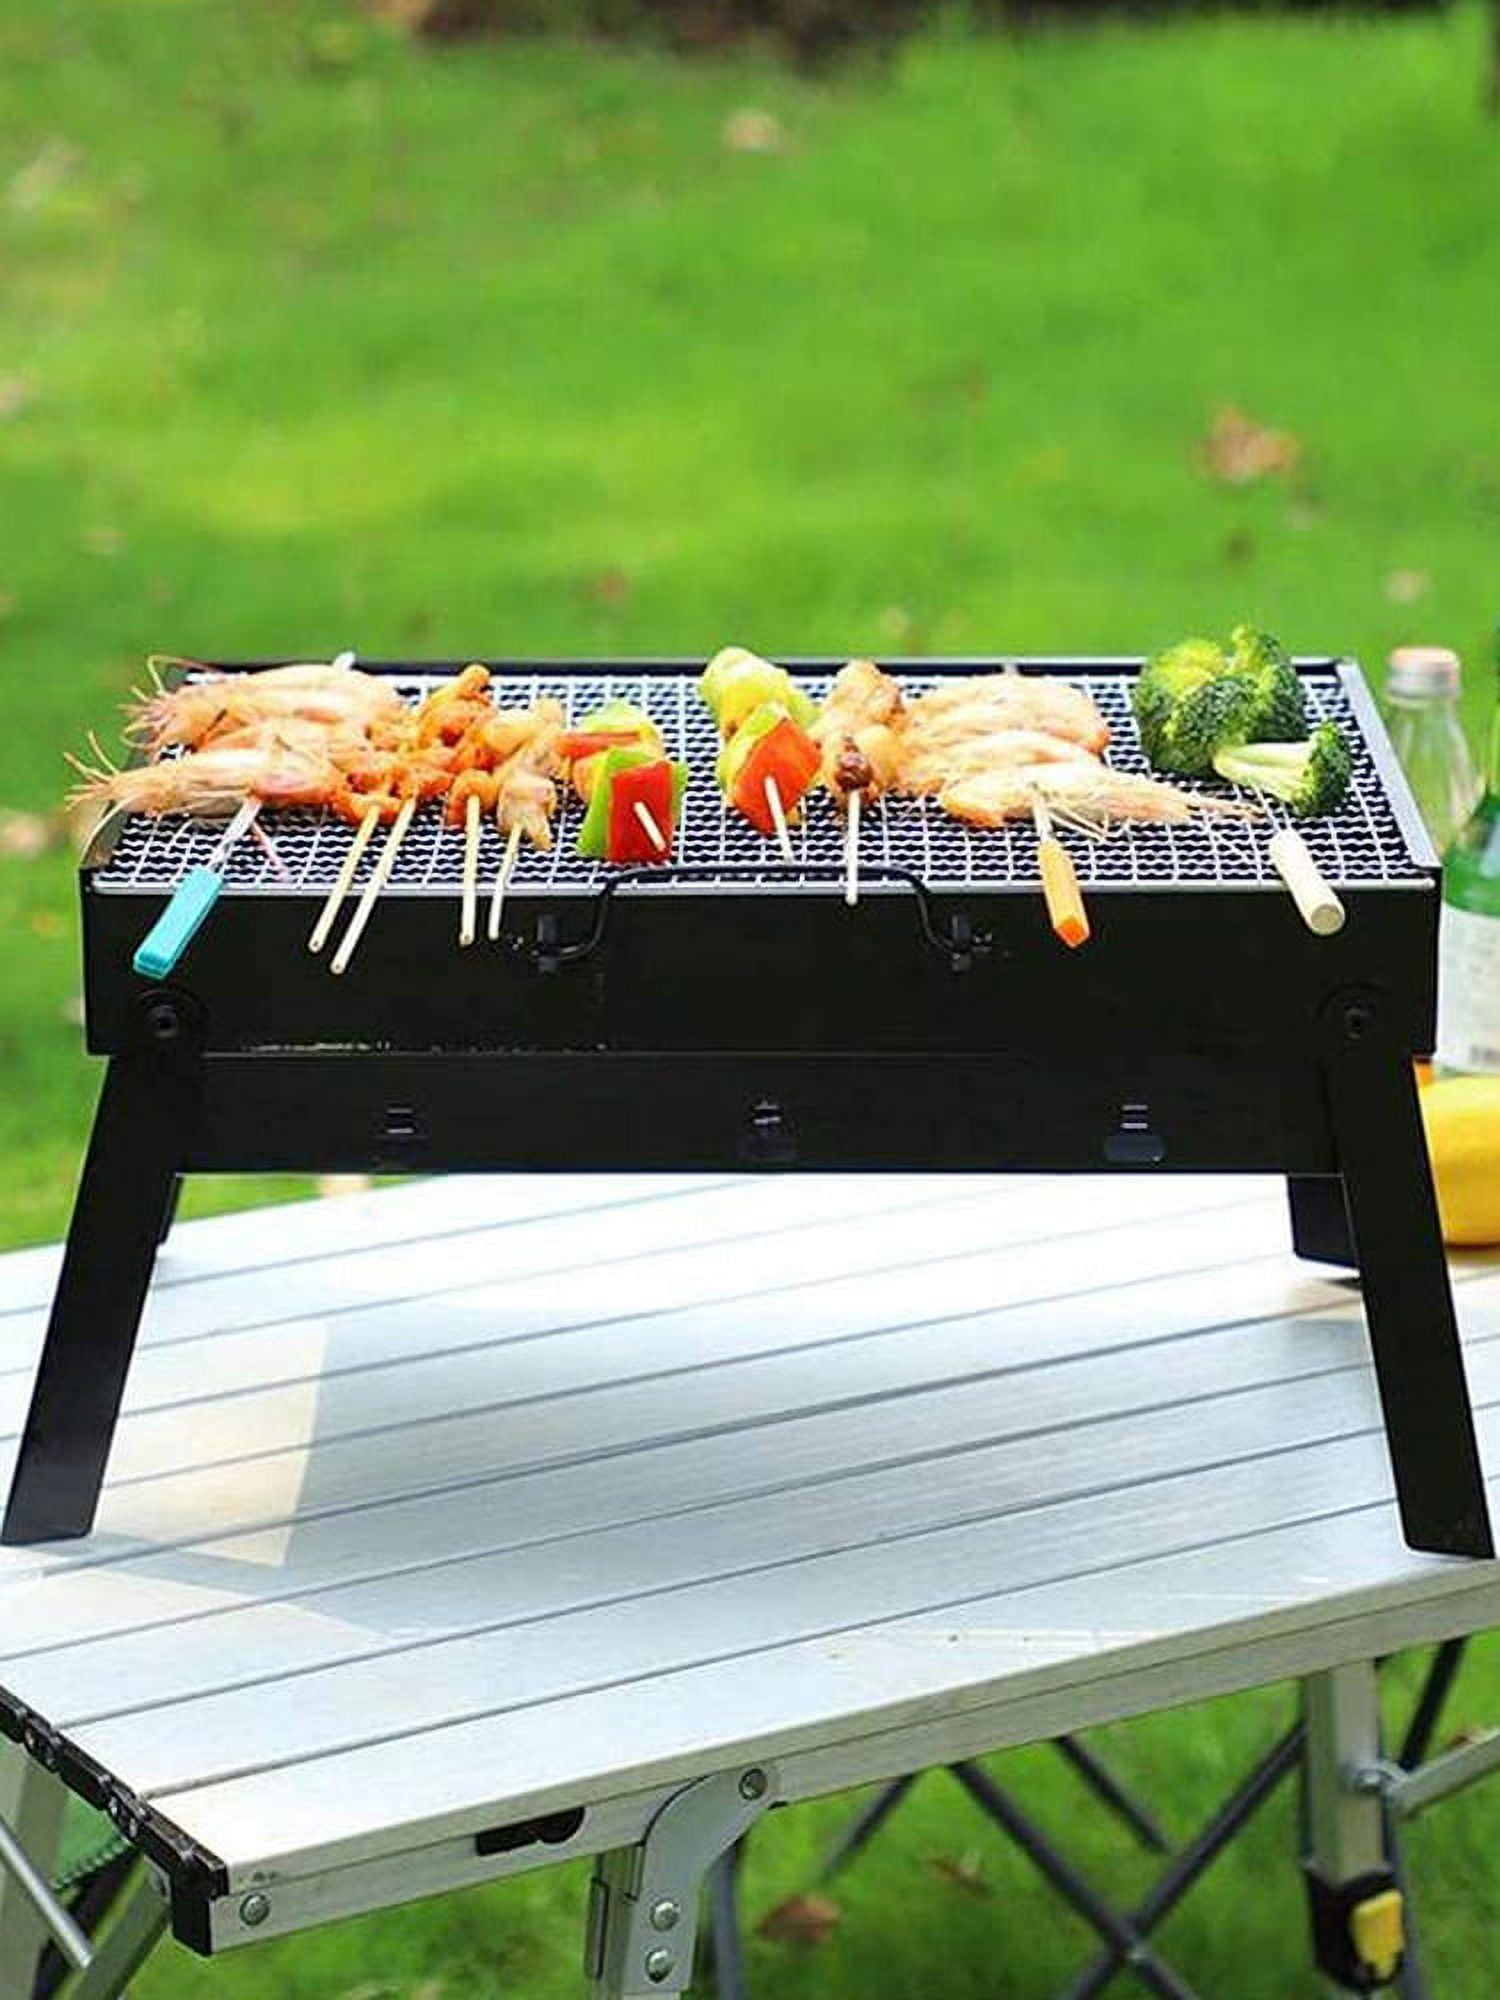 Grill, Wood Stove, Outdoor Bbq Camping Grill, Folding Compact Stainless  Steel Charcoal Barbeque Grill, Detachable Bonfire Grill Stove, Wood Burning  Camp Stove, Suitable For Oven Barbecue, Home, Rv, Bbq Accessories, Grill  Accessories 